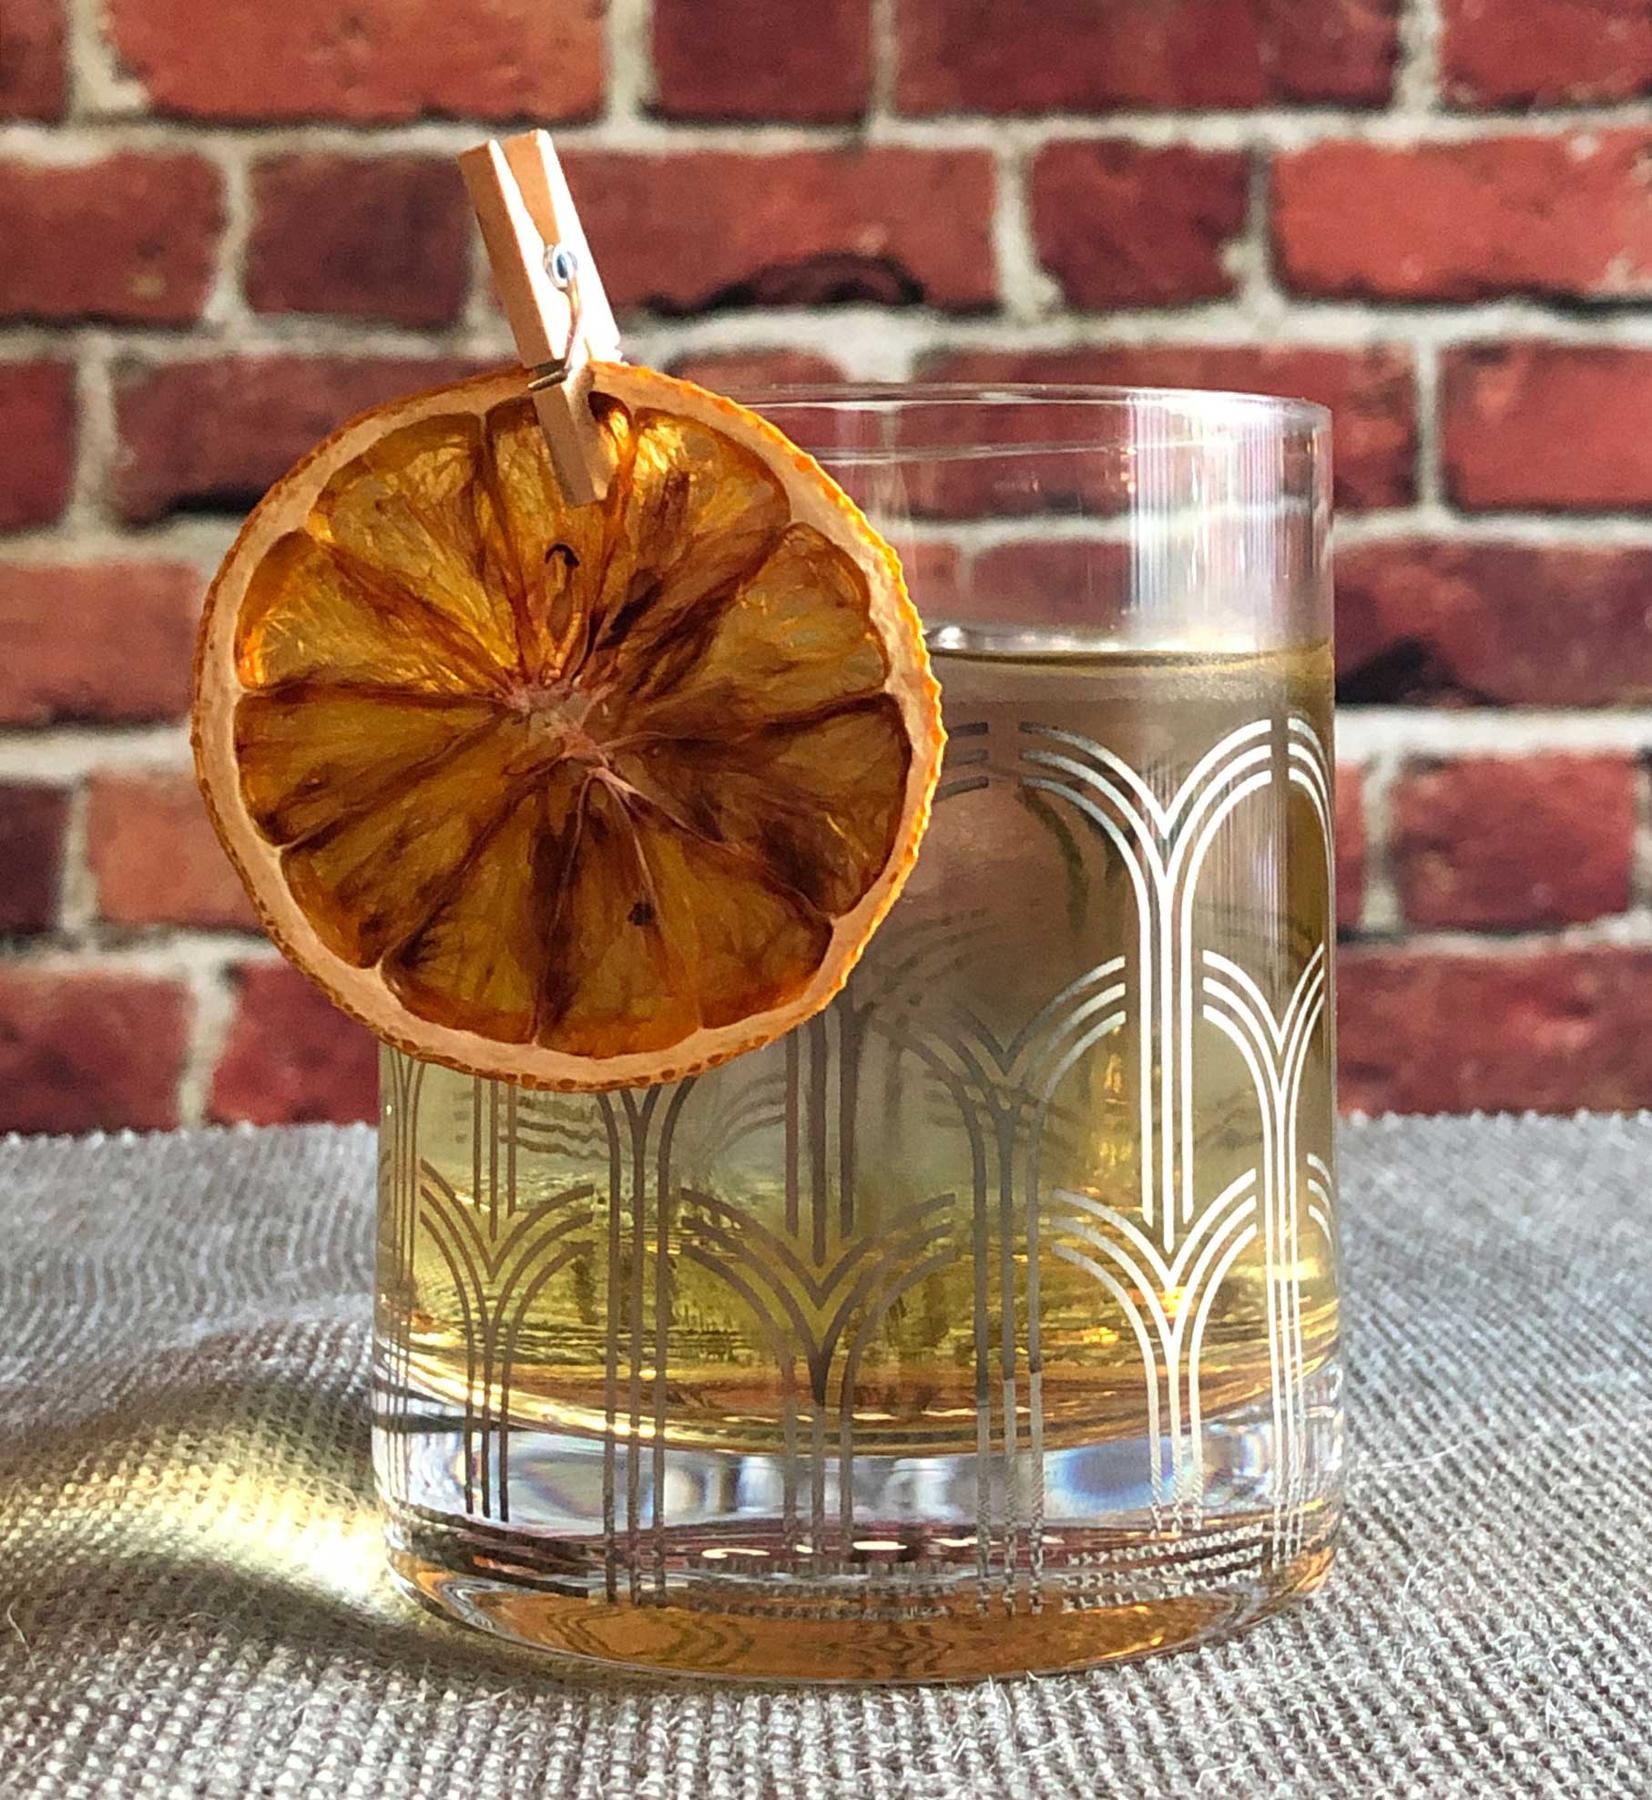 An example of the Charlotte Gainsbourg, the mixed drink (drink), by Kelley Swenson, Portland, Oregon, from the book “Left Coast Libations”, featuring Cocchi Americano Bianco, orange-flavored liqueur, pastis, and orange wheel; photo by Lee Edwards